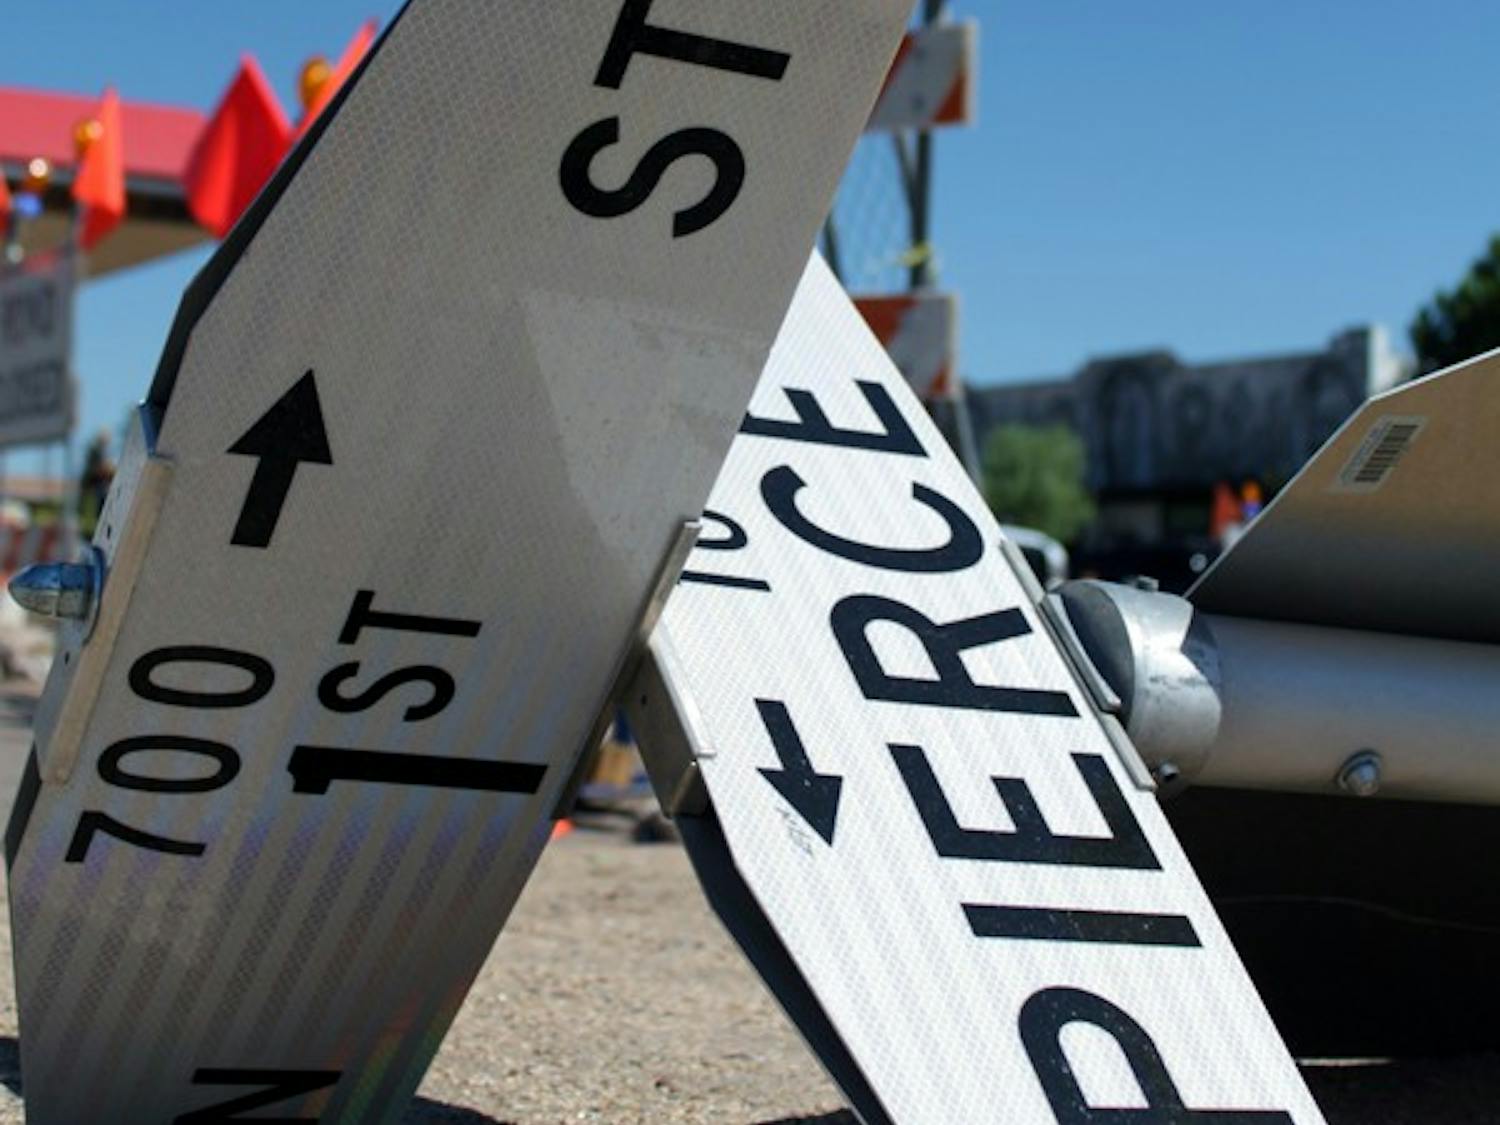 UP IS DOWN: The Pierce and 1st streets road sign lays on the ground because of construction on 1st street. (Photo by Beth Easterbrook)